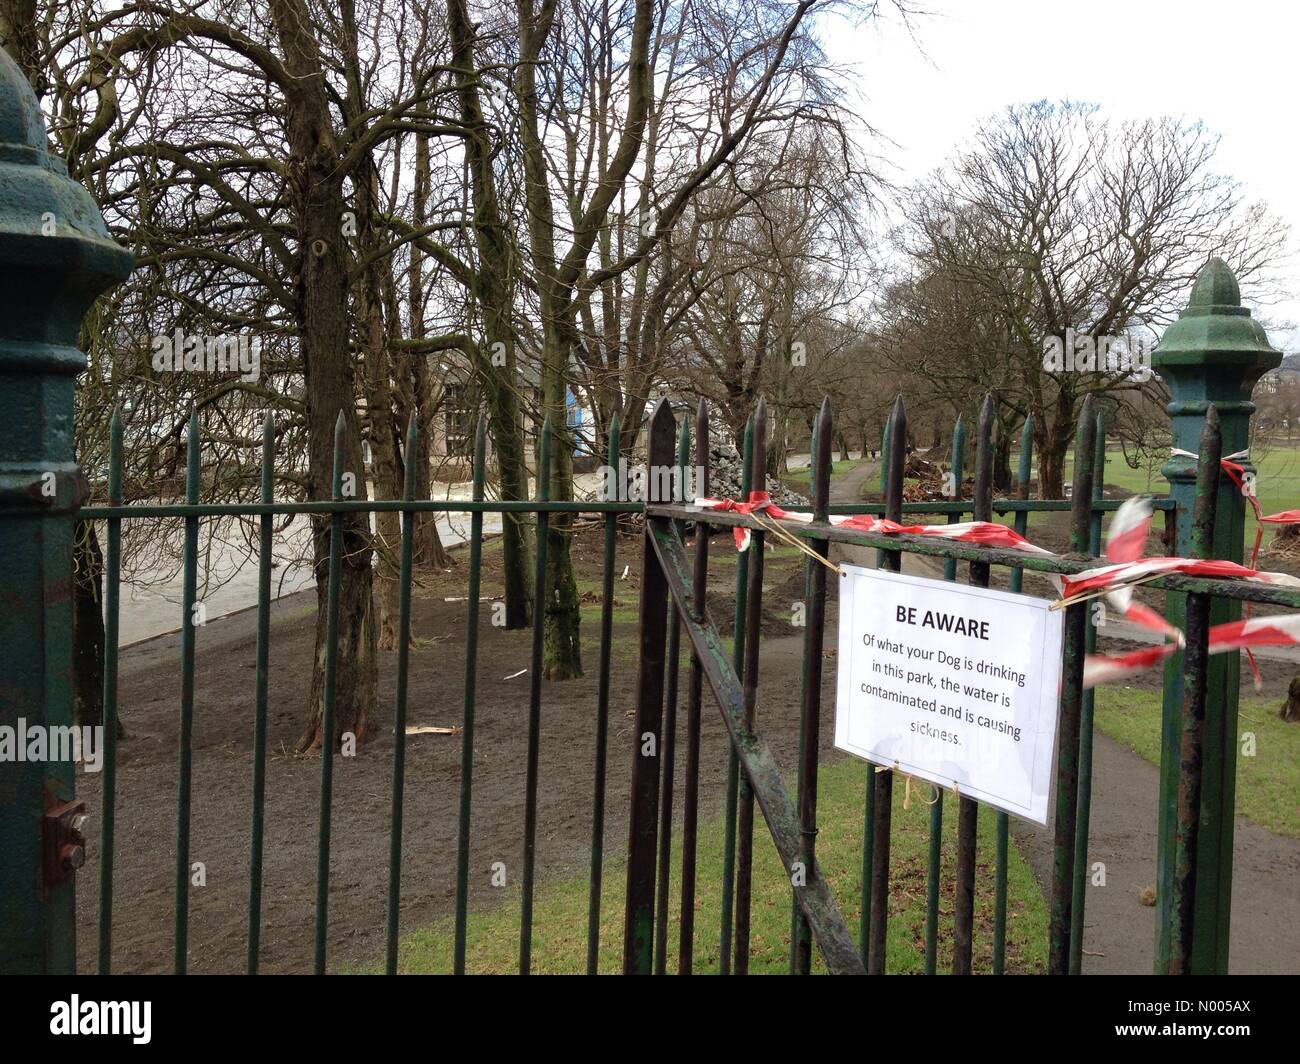 Station Rd, Keswick, Cumbria, UK. 19th Dec, 2015. On a wet and windy day dog walkers are warned that the recent flooding has caused the waters of the river Greta to become contaminated and is causing sickness. Fitz Park Keswick Cumbria Credit:  Glenys Nicholson/StockimoNews/Alamy Live News Stock Photo